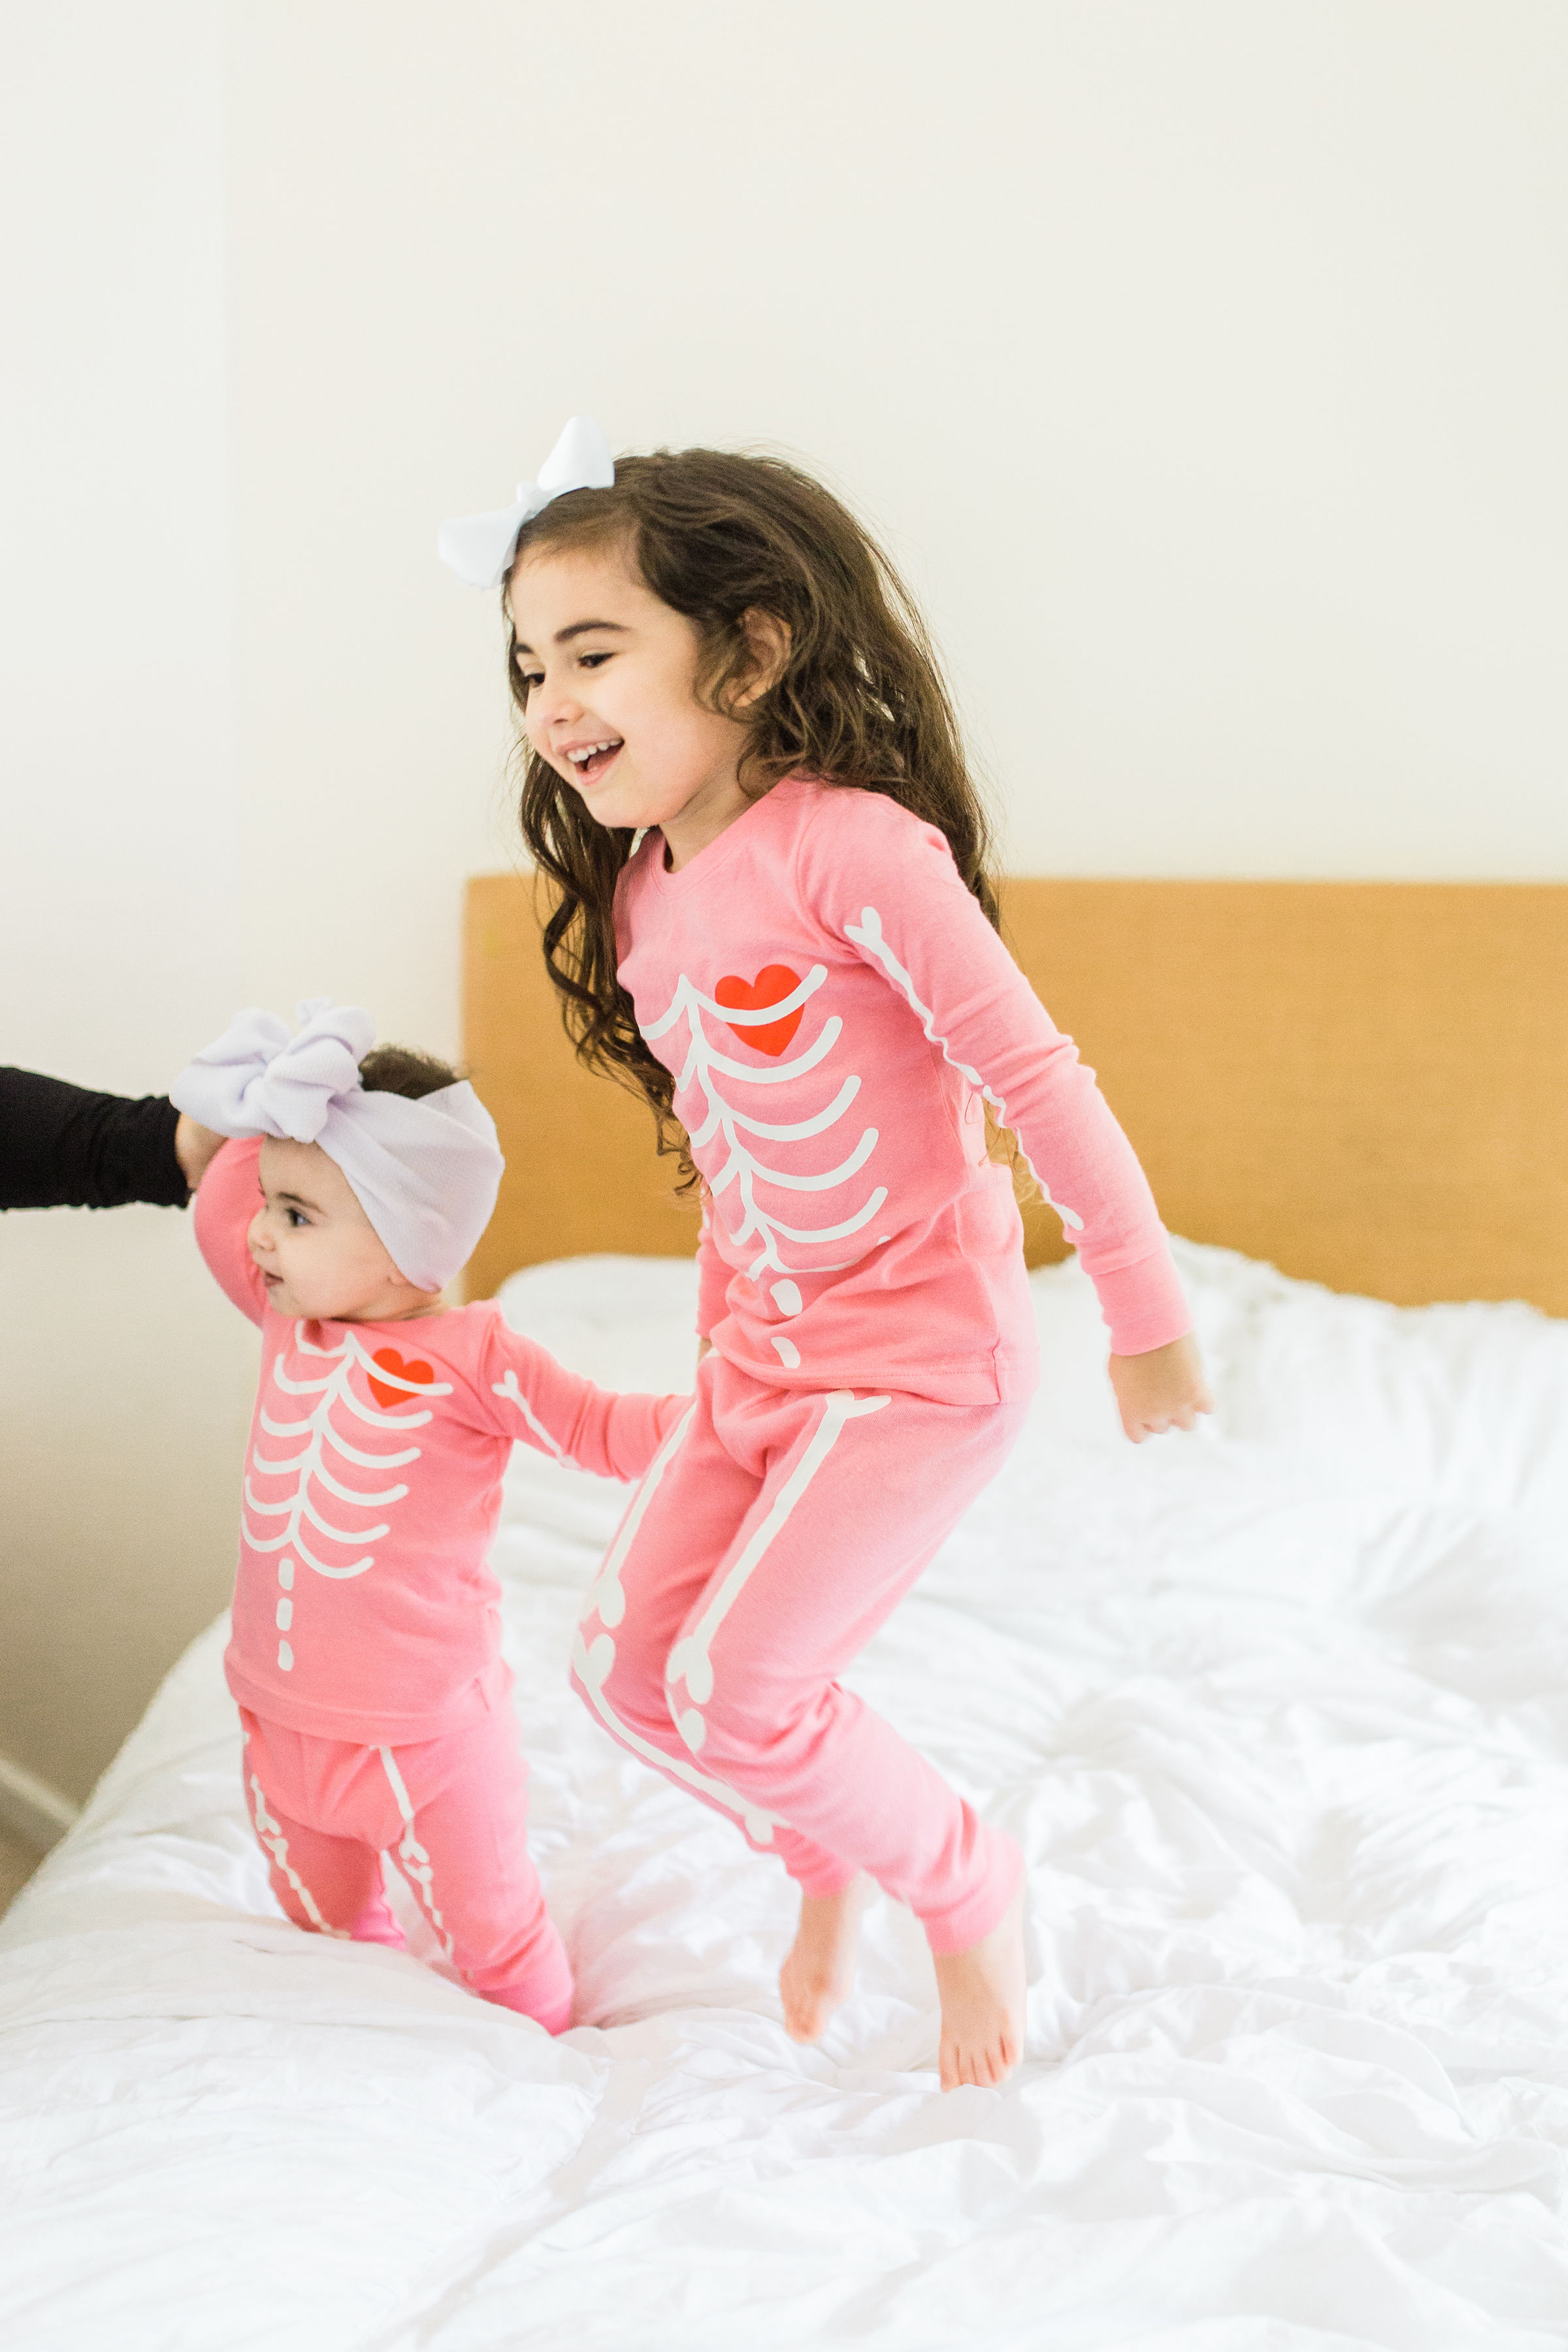 Looking to start a few fun Halloween family traditions? We're sharing our favorites, including a roundup of the best Halloween movies for kids, the cutest matching Halloween pajamas for your little ones, and plenty of spooky party inspiration and recipes! Click through for the details. #halloween #halloweenpajamas #halloweenideas #halloweentraditions #familyhalloween #kidshalloween #kidshalloweenfun #kidshalloweenpajamas #babyhalloween | glitterinc.com | @glitterinc